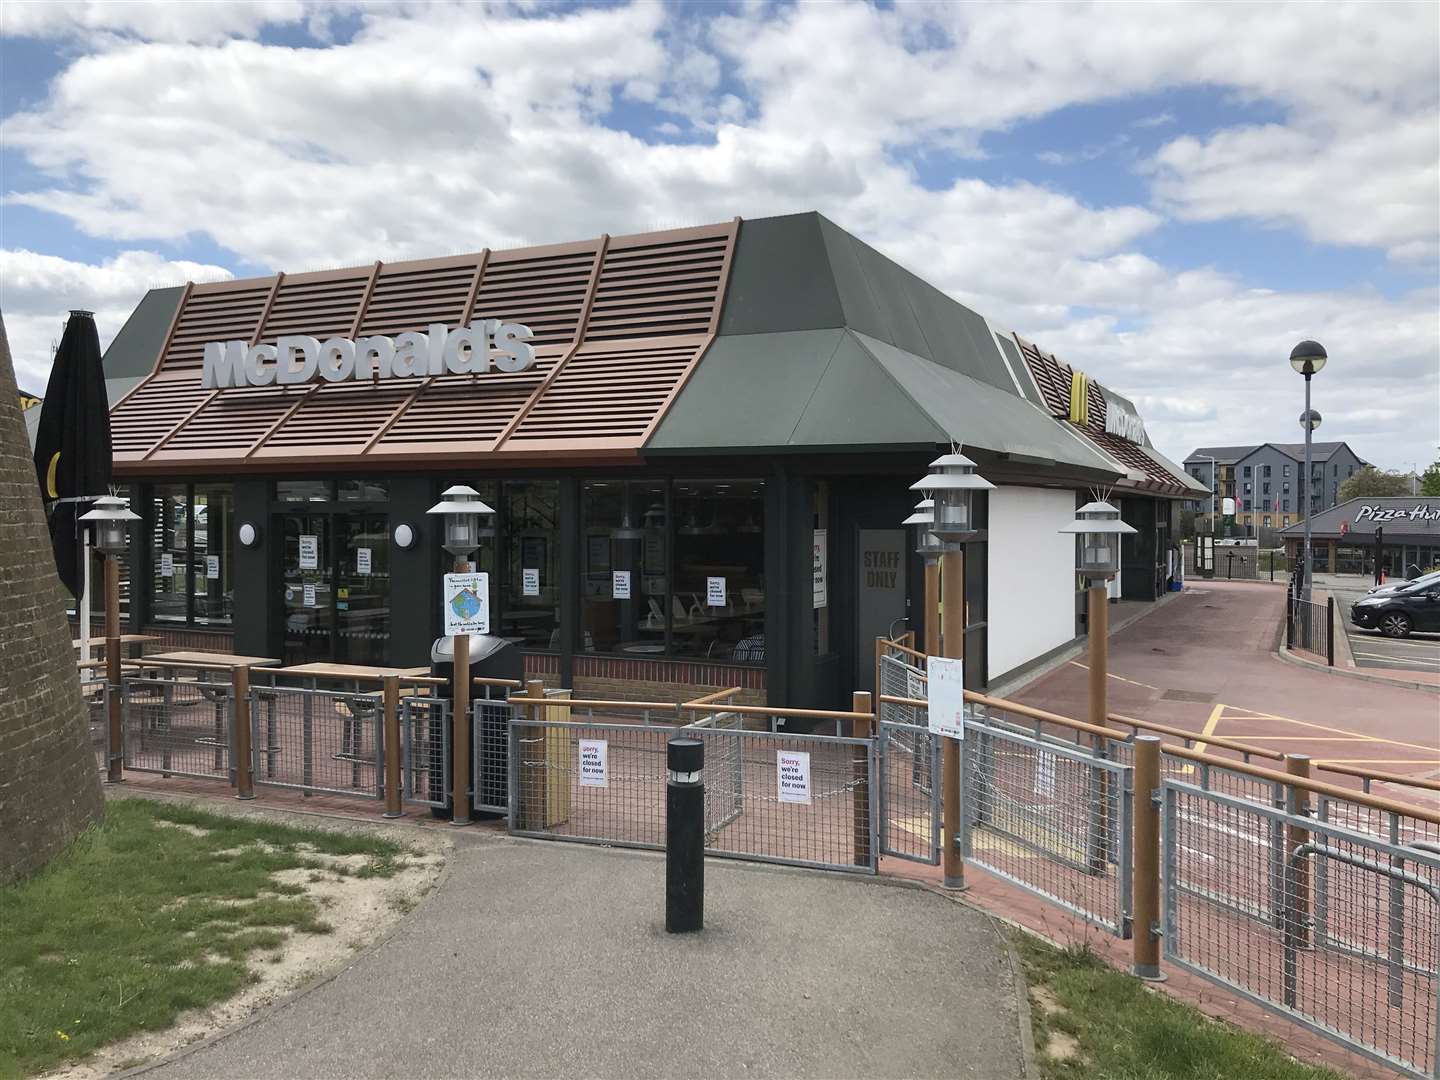 The boys, both 15, were chased from the McDonald's at the Sittingbourne Retail Park, Mill Way, to the town's railway station